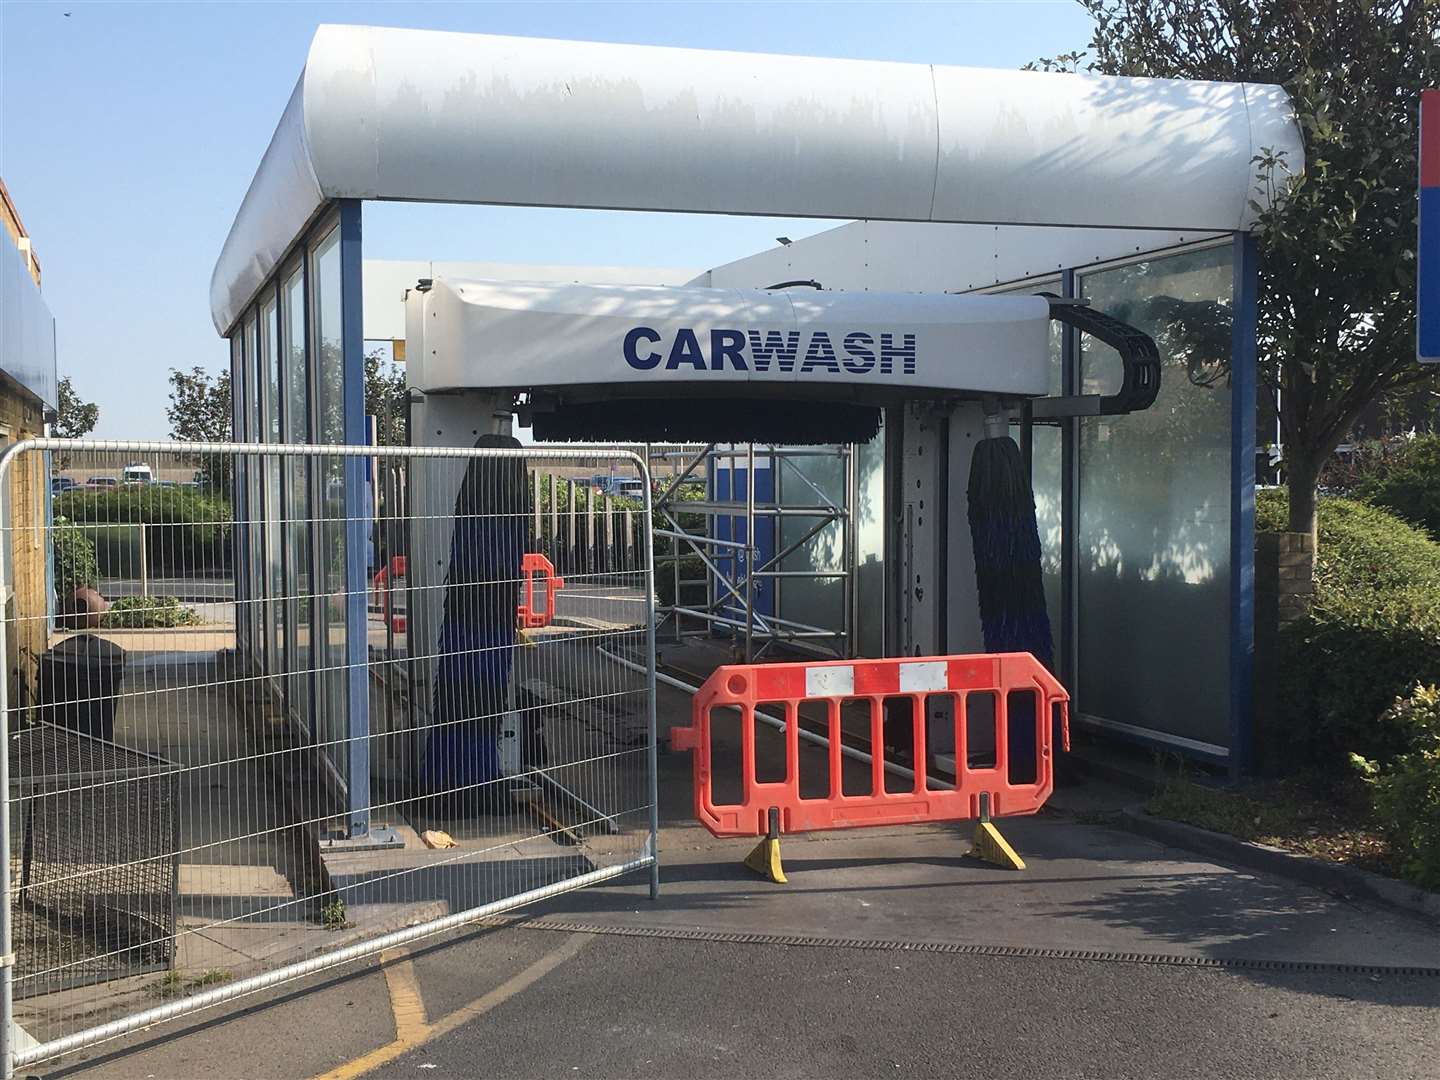 The car wash is closed while Tesco petrol station in Bridge Road, Sheerness, gets a facelift and a new canopy